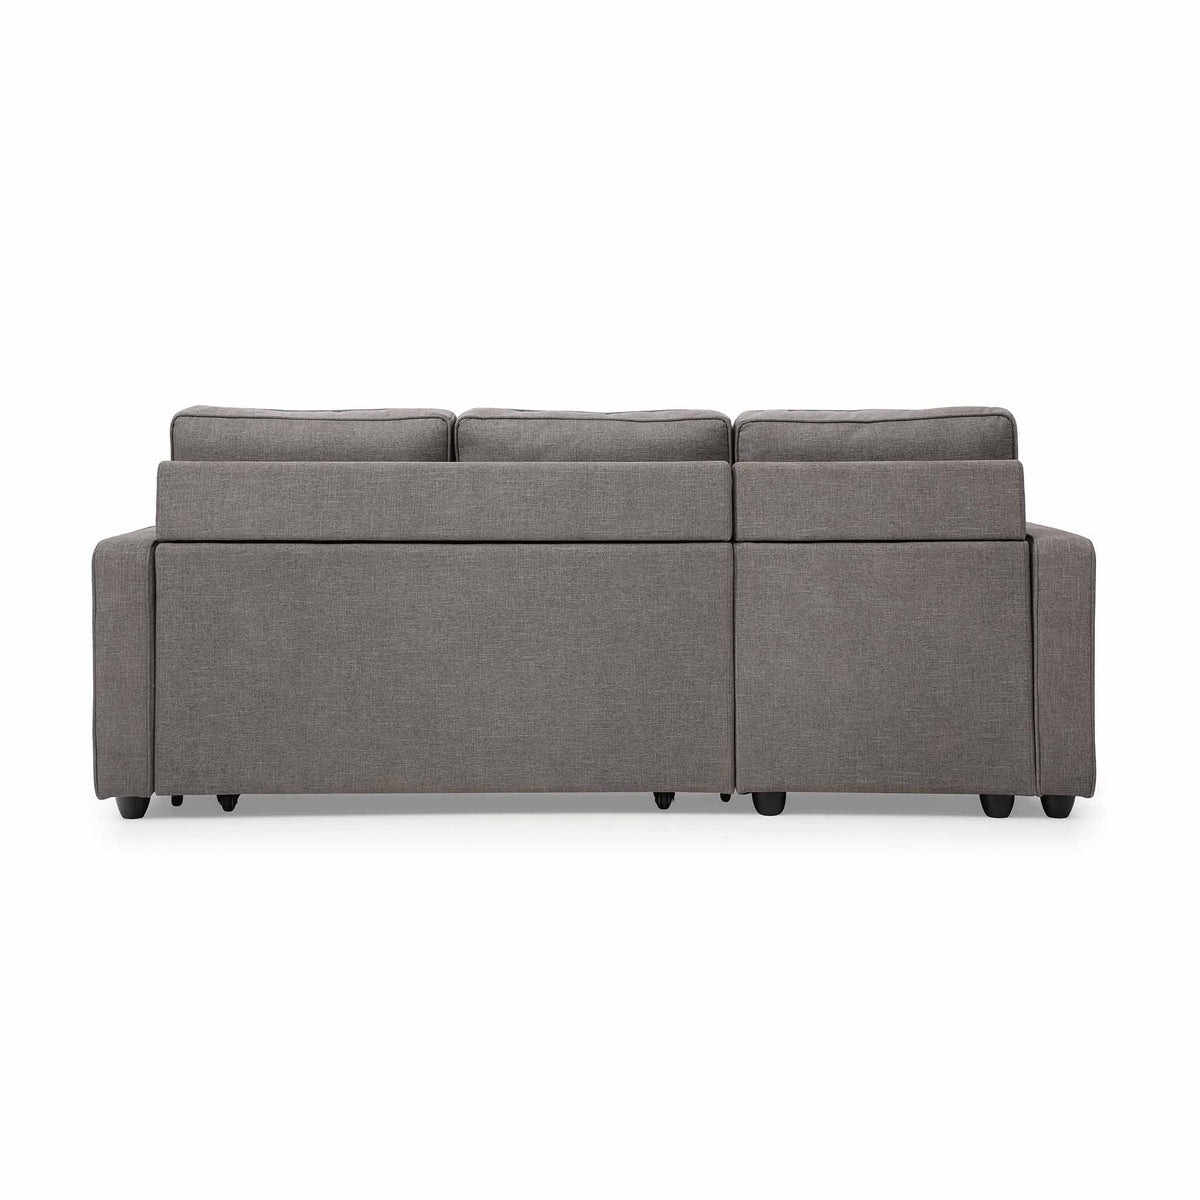 back view of the Soldier Grey 3 Seater Corner Sofa Bed from Roseland Furniture